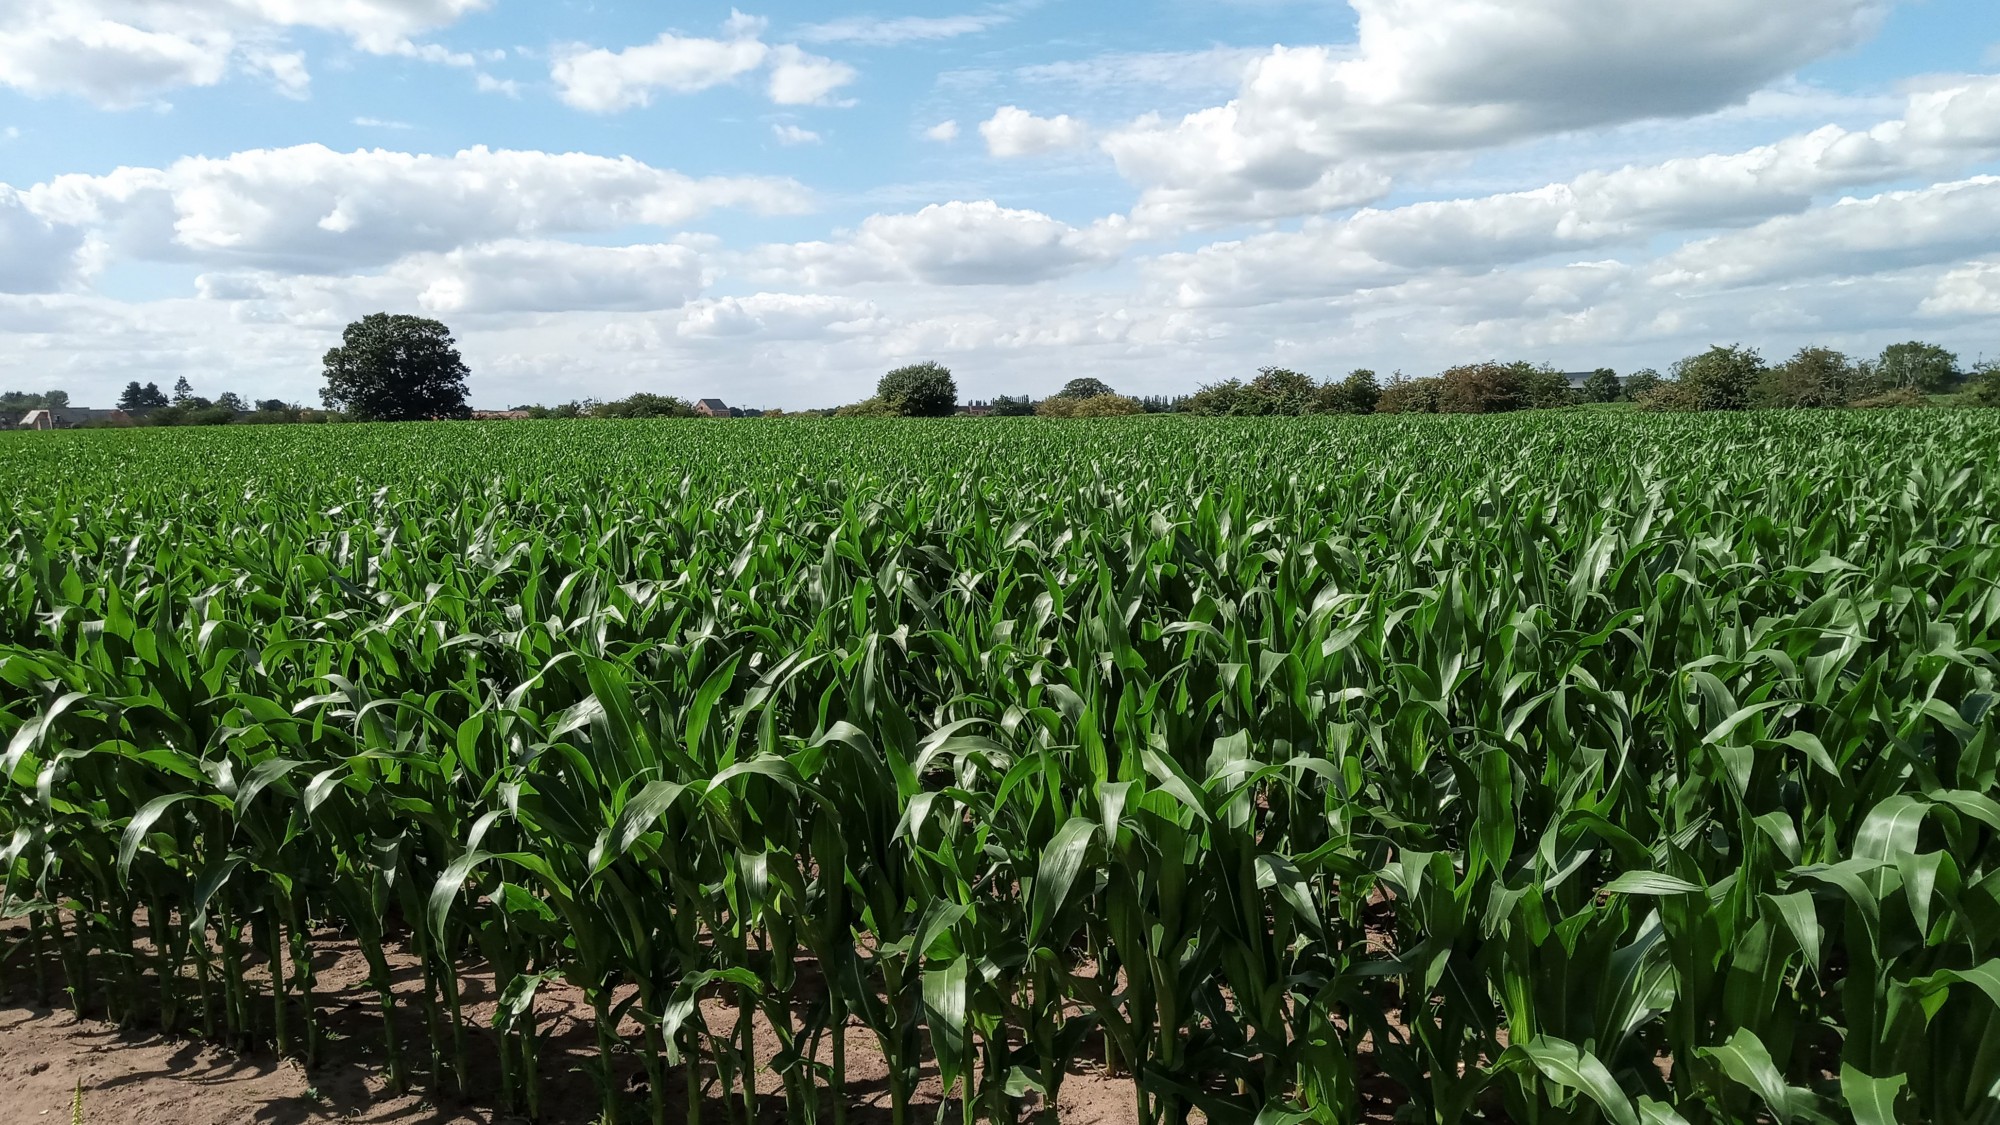 Maize growing in the sunshine